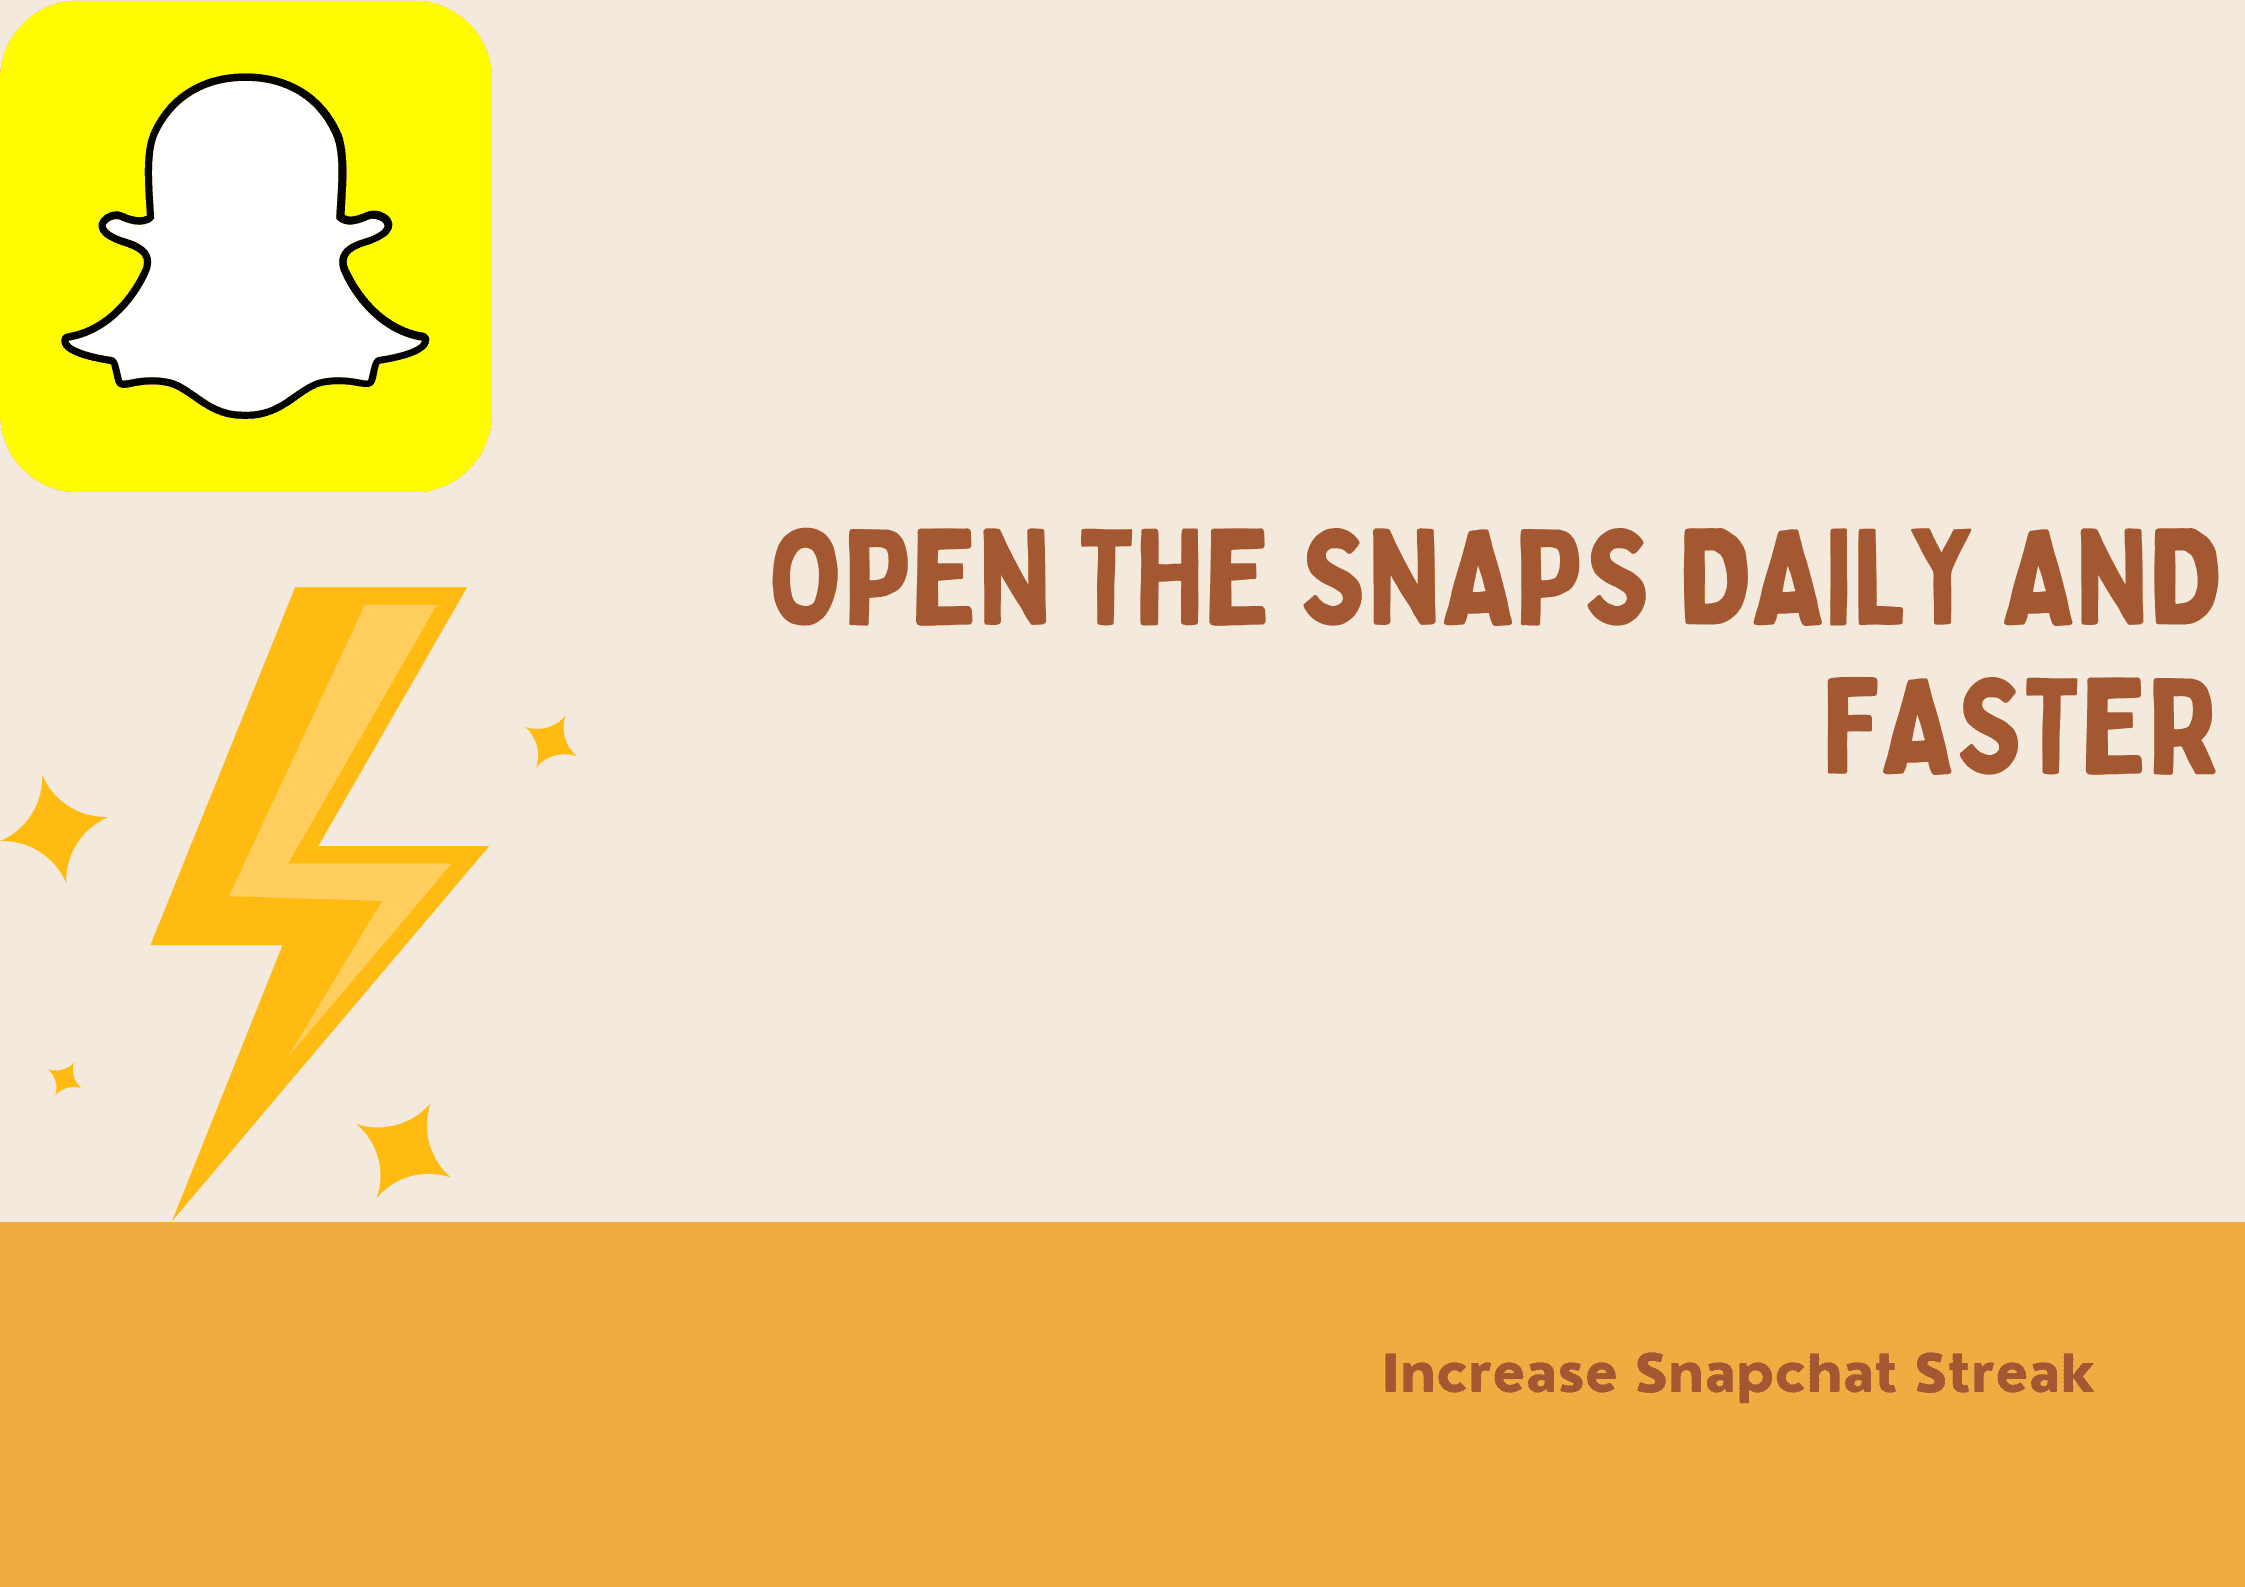 Open the snaps daily and faster